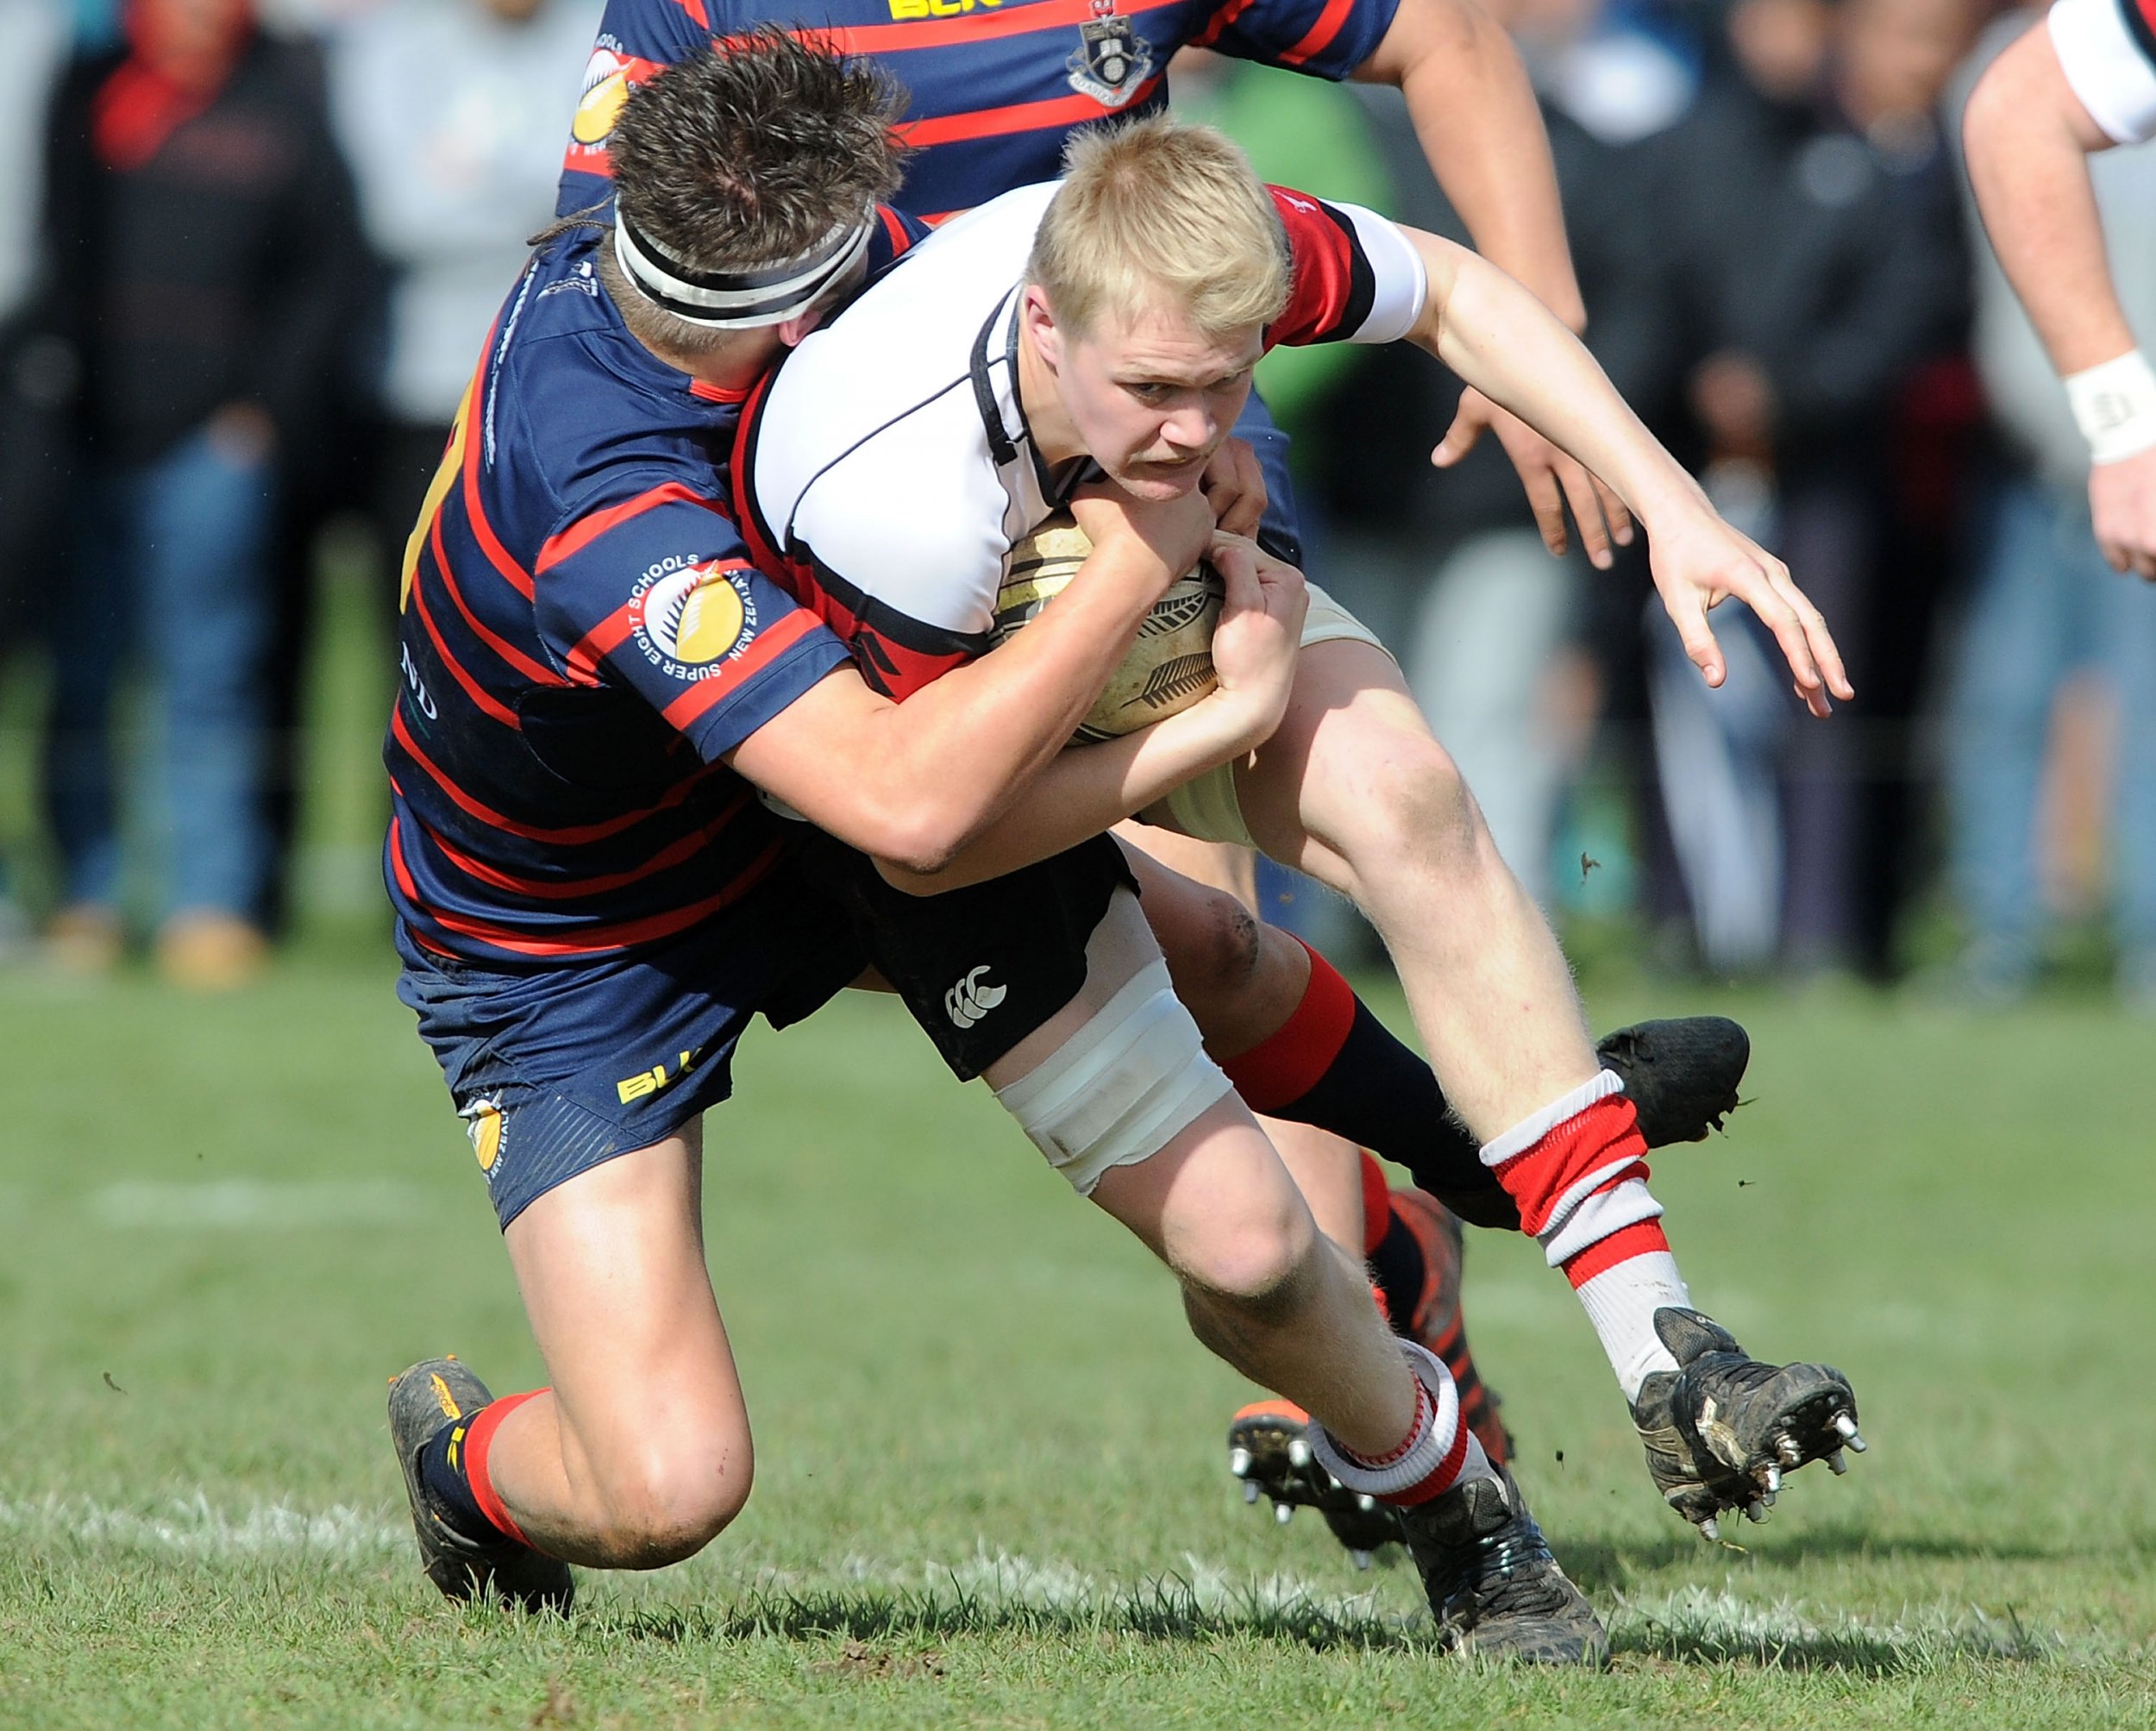 Tackling in School Rugby  Faces Ban Over Concussion Fears